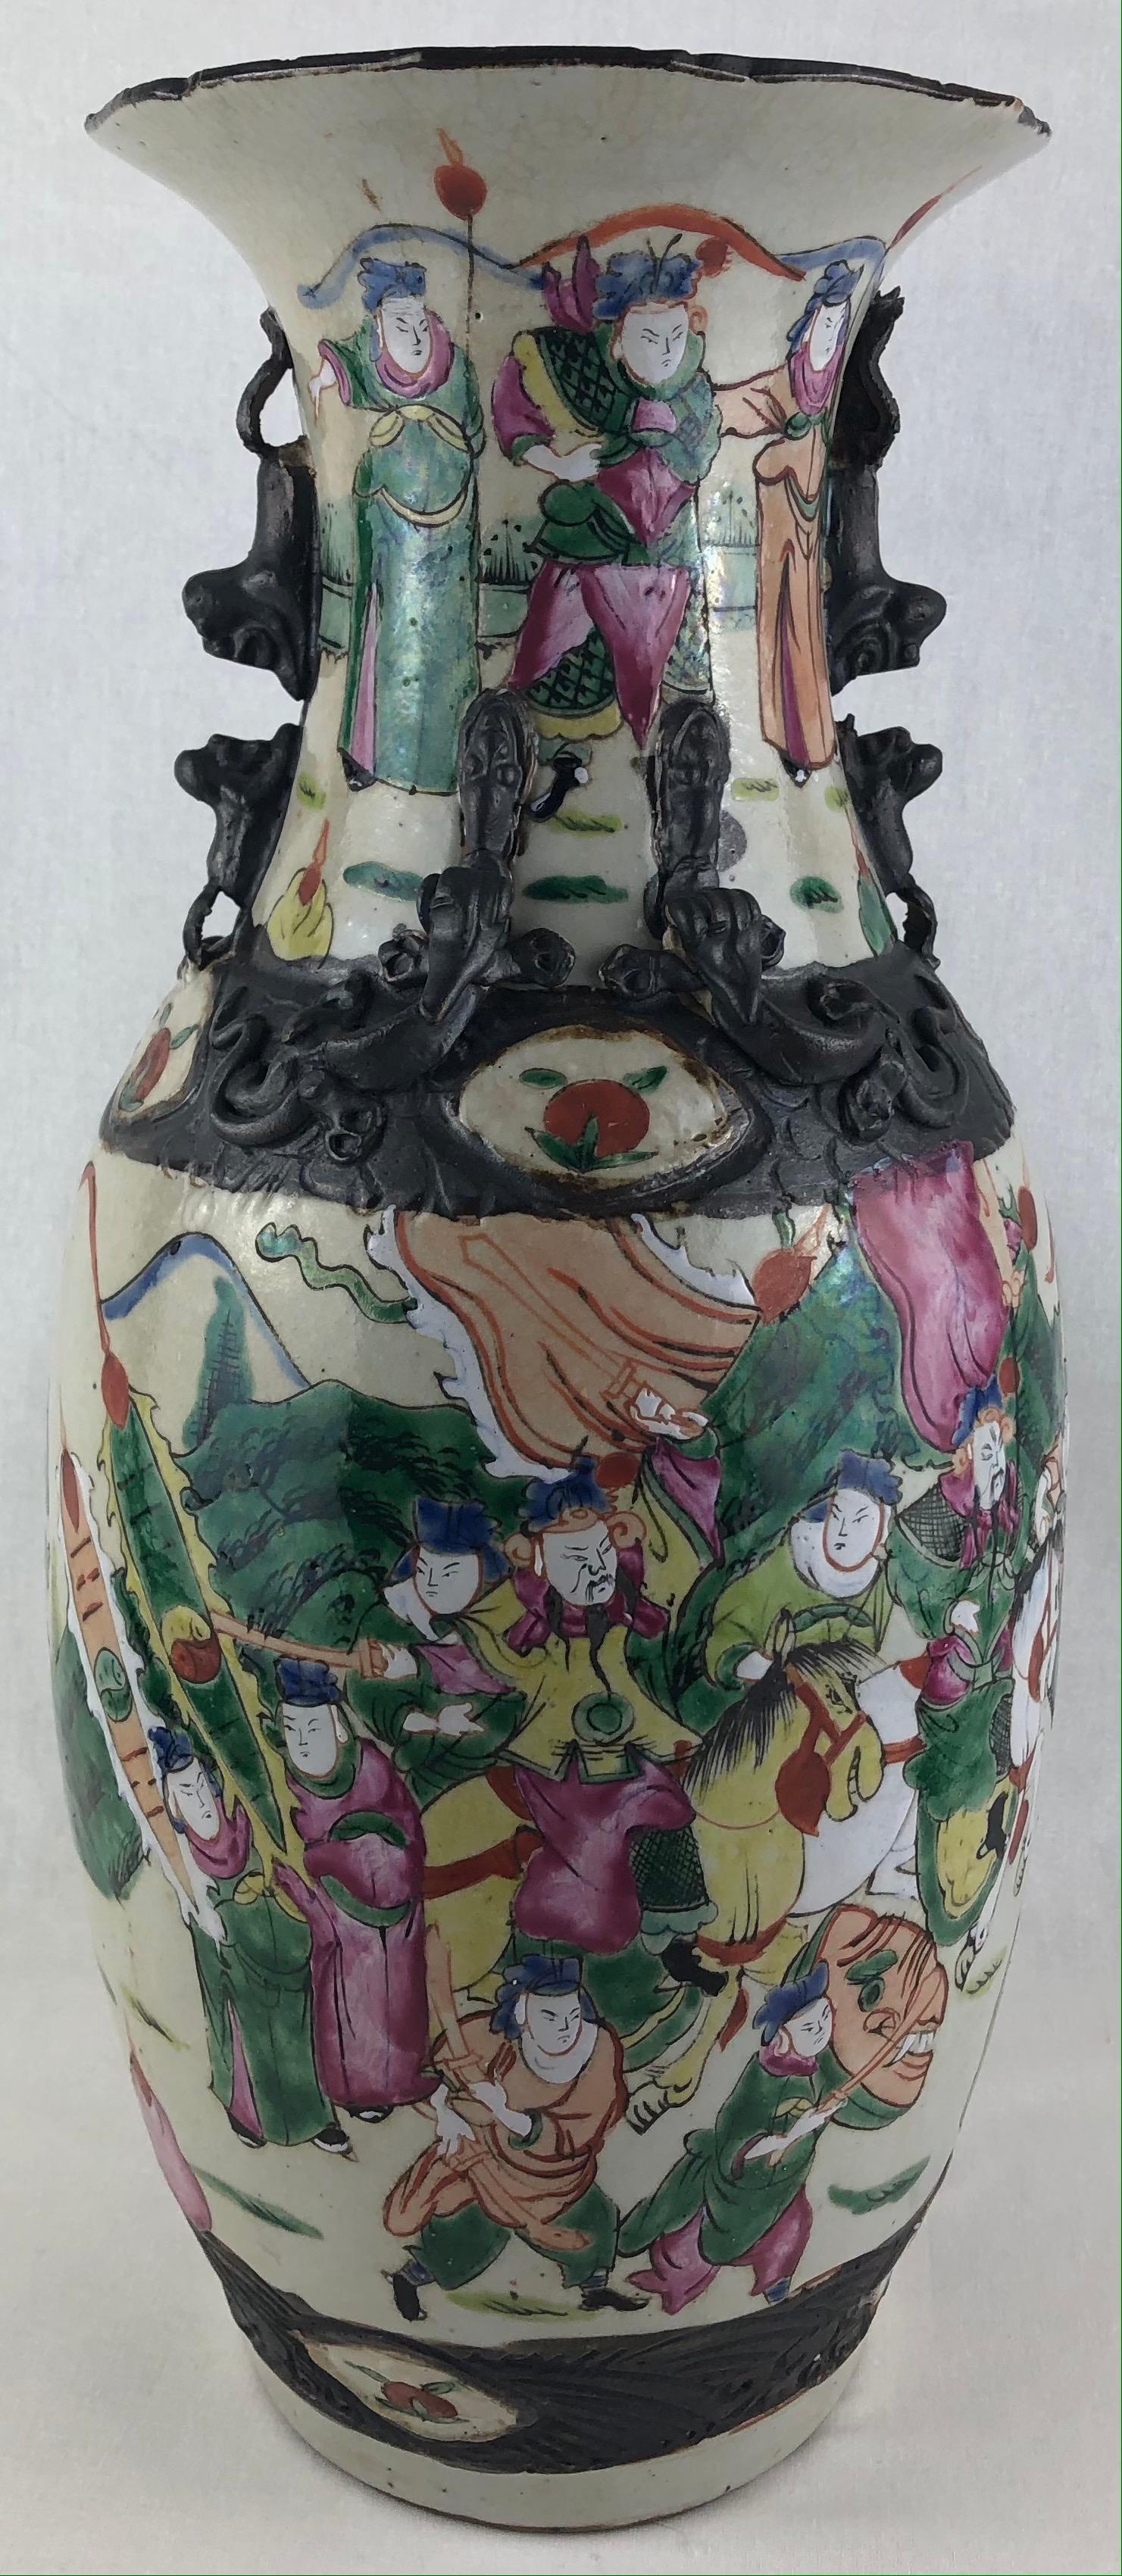 Very decorative pair of Japanese crackle ware poly chrome warrior motif vases with high relief foo lions. Each piece is signed on the underside and have slight variances. Hand painted in a multitude of colors including purple, green, orange, white,